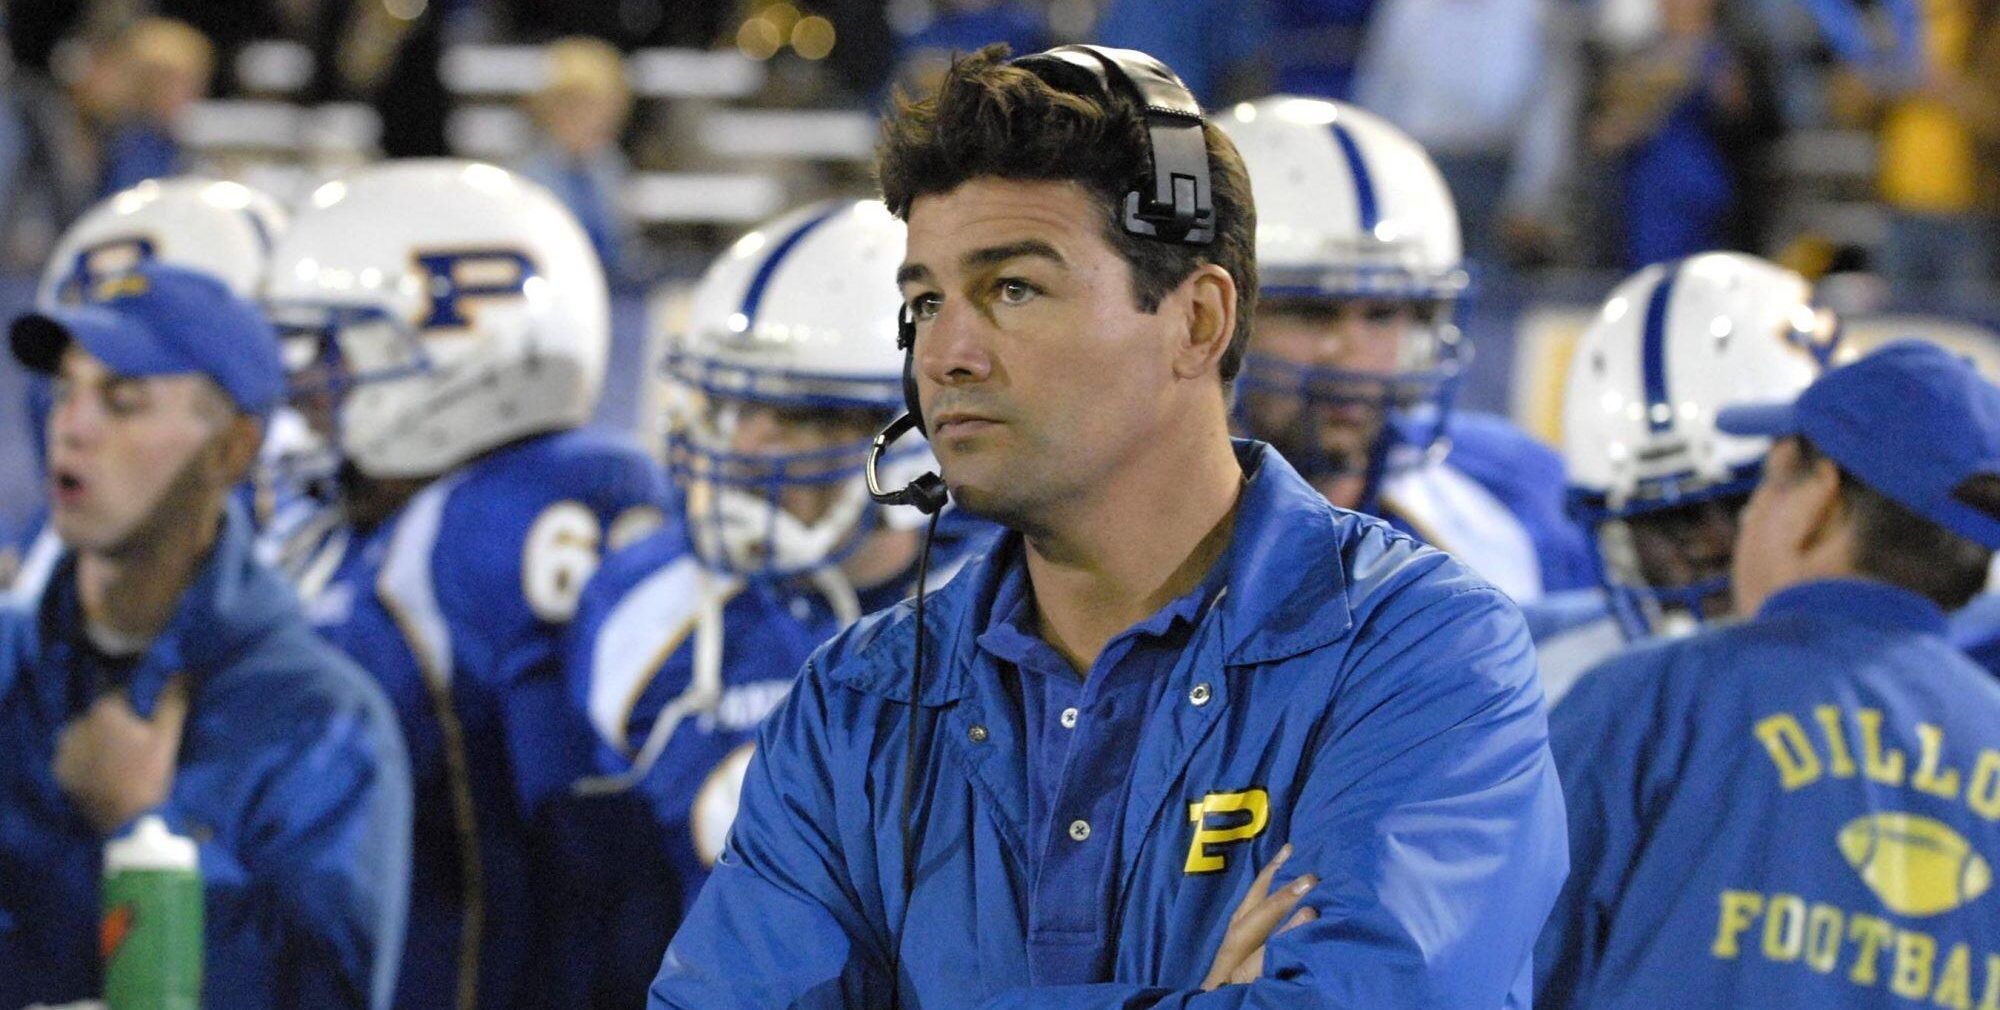 Coach Eric Taylor (Kyle Chandler) in Friday Night Lights